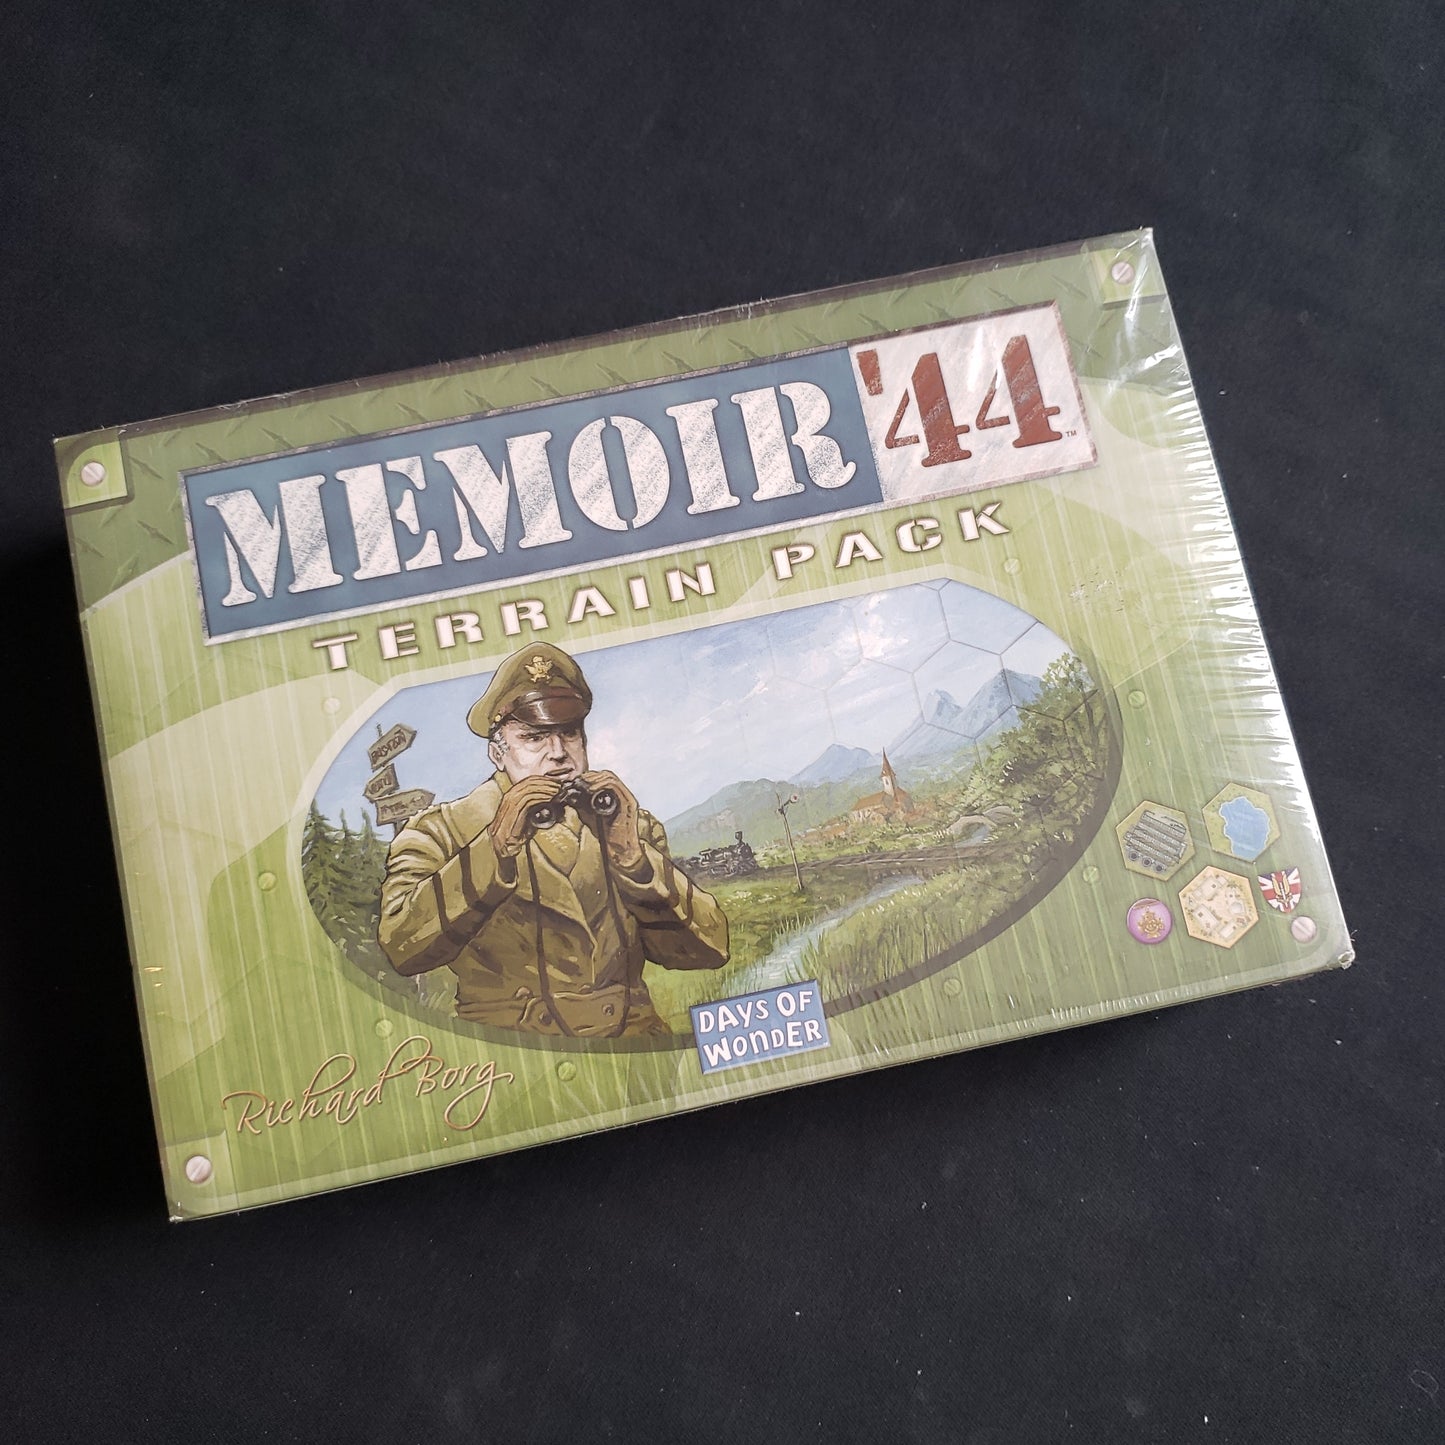 Image shows the front cover of the box of the Terrain Pack expansion for the Memoir 44 board game